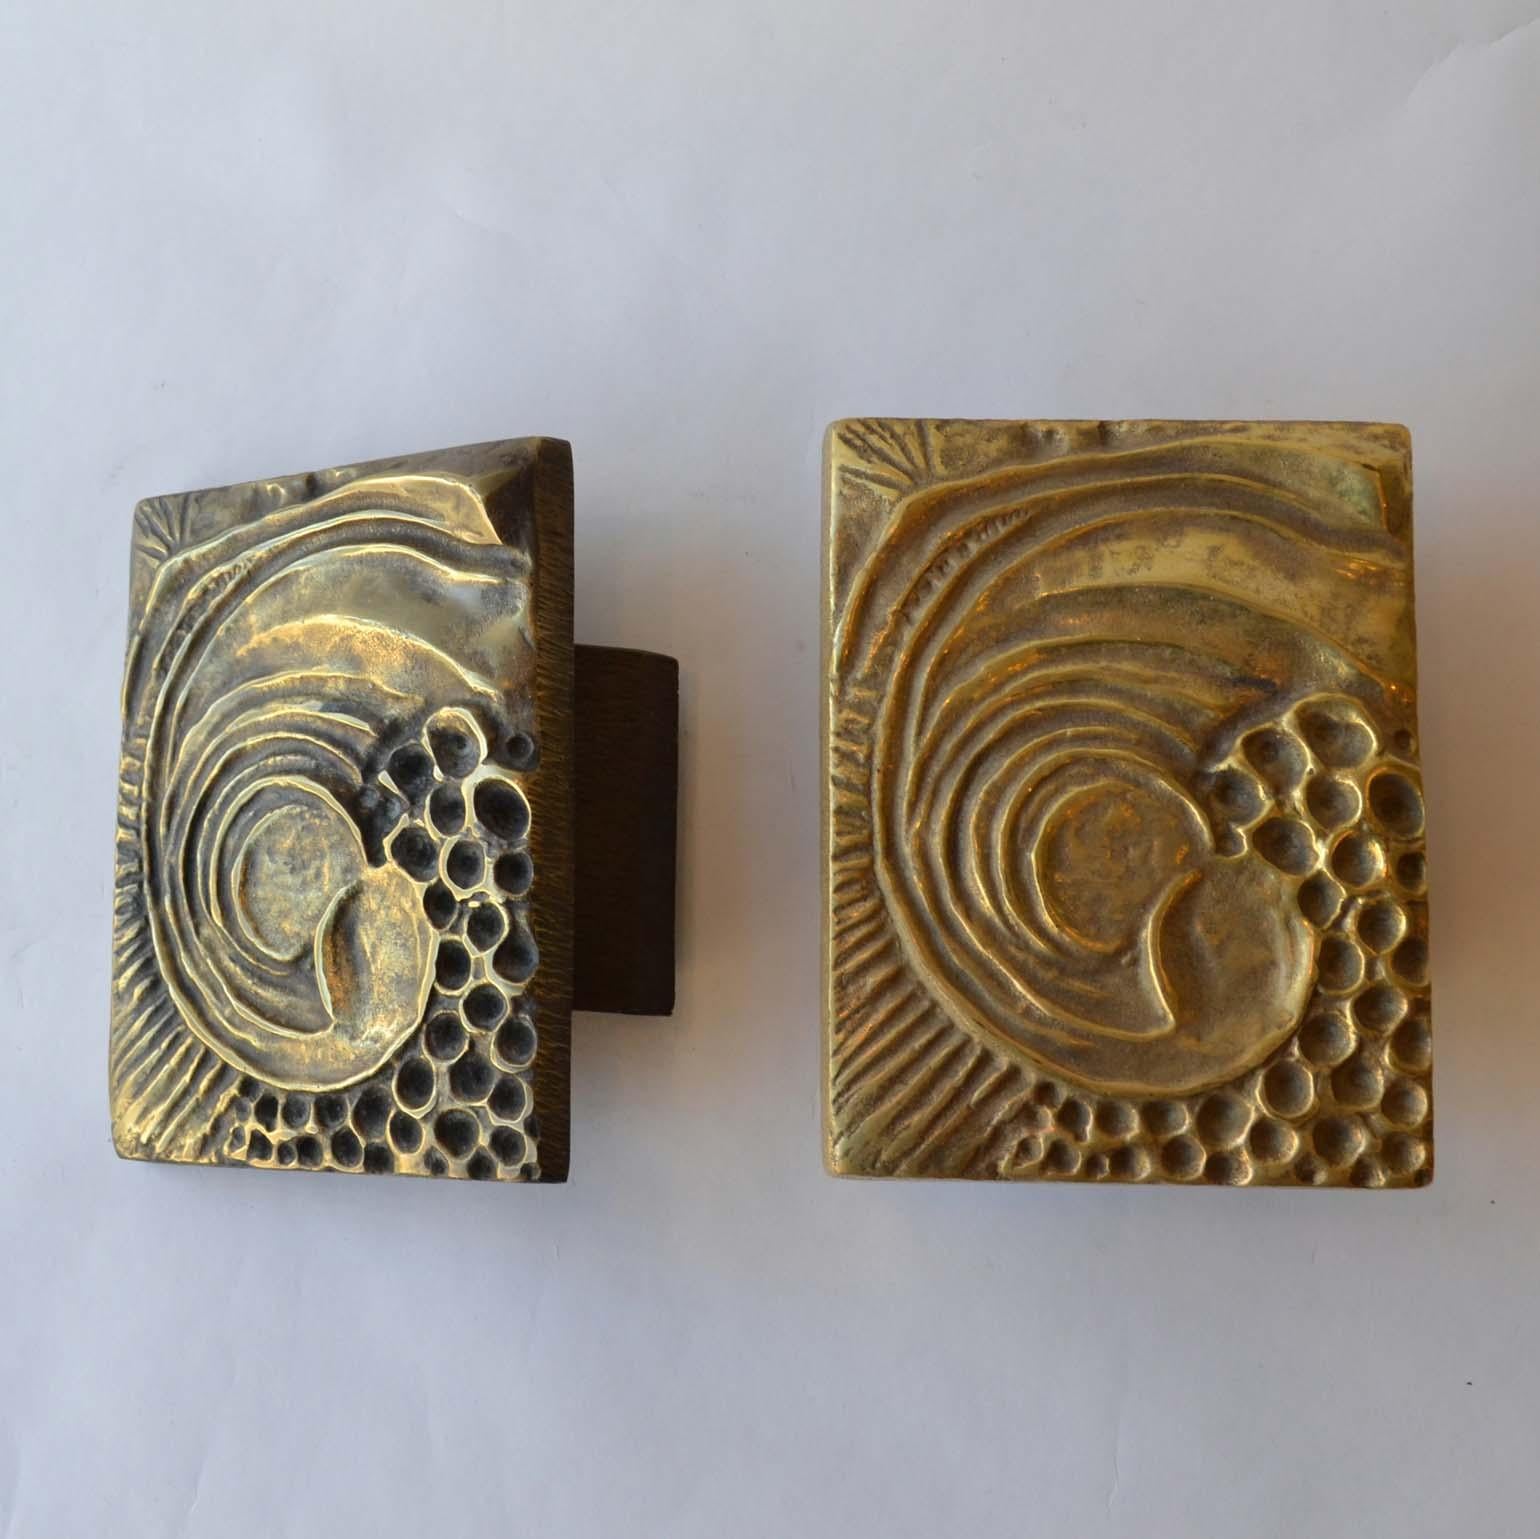 Late 19th Century 1970s Brutalist Pair of Bronze Push and Pull Door Handles with Abstract Relief